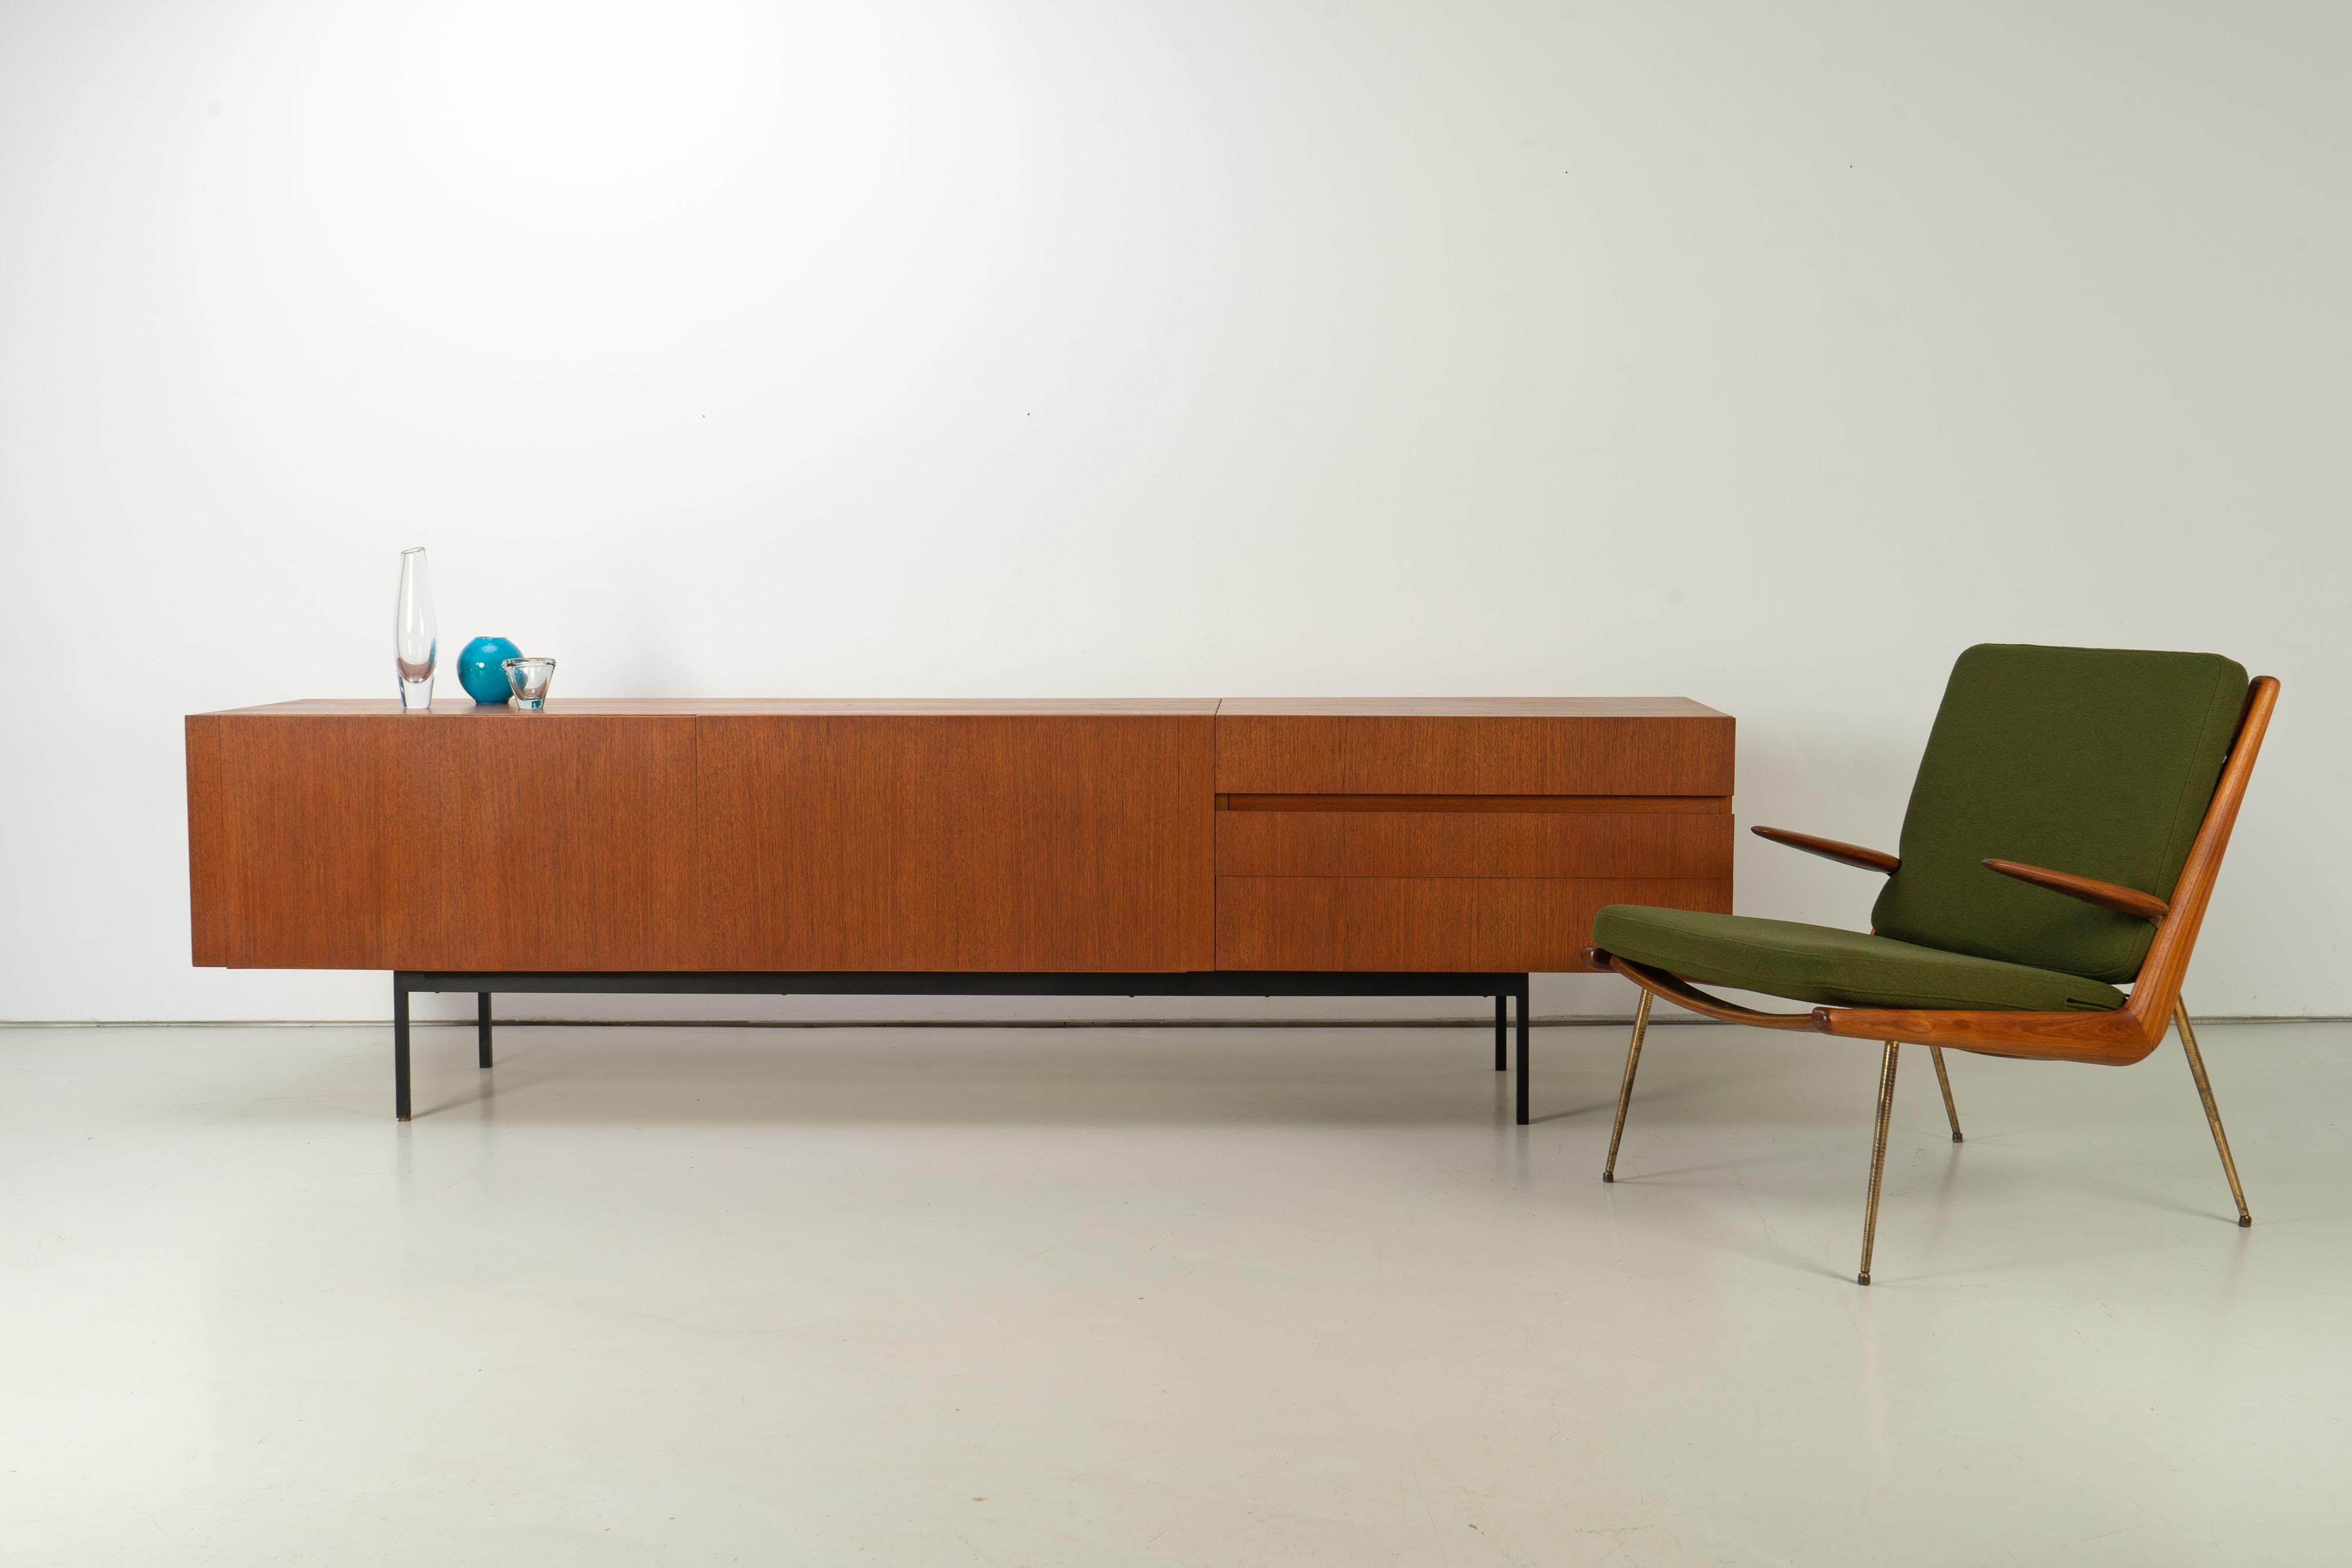 Rare sideboard by German mid-century designer Dieter Waeckerlin, produced by Behr. This sideboard is executed in teak wood with a black steel base with manufacturer's stamp.